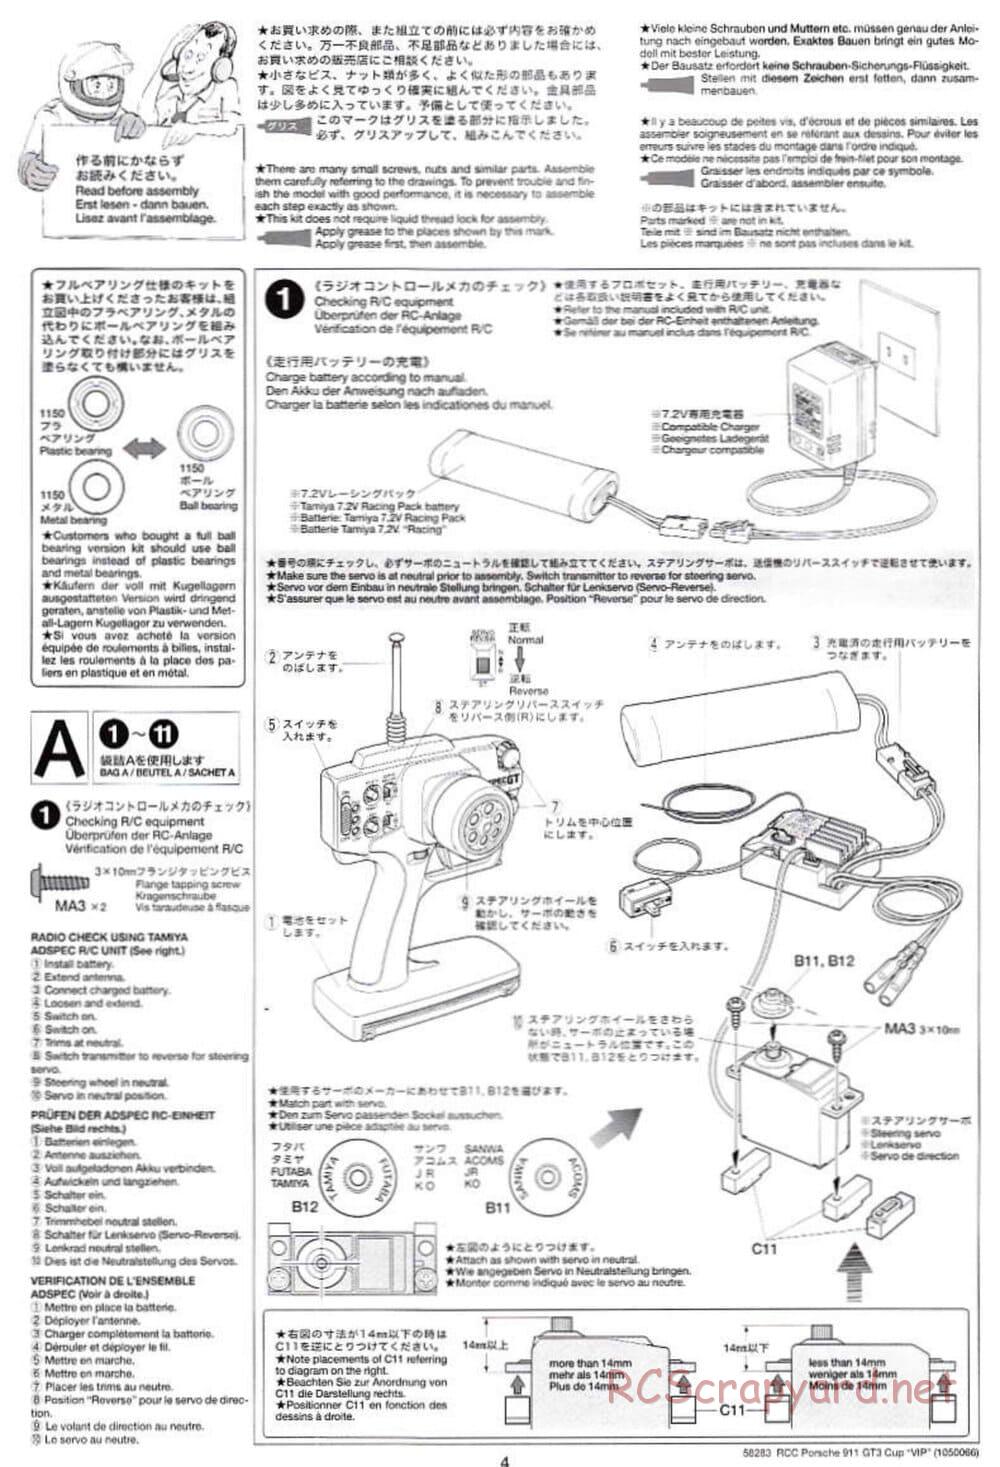 Tamiya - Porsche 911 GT3 Cup VIP - TL-01 Chassis - Manual - Page 4